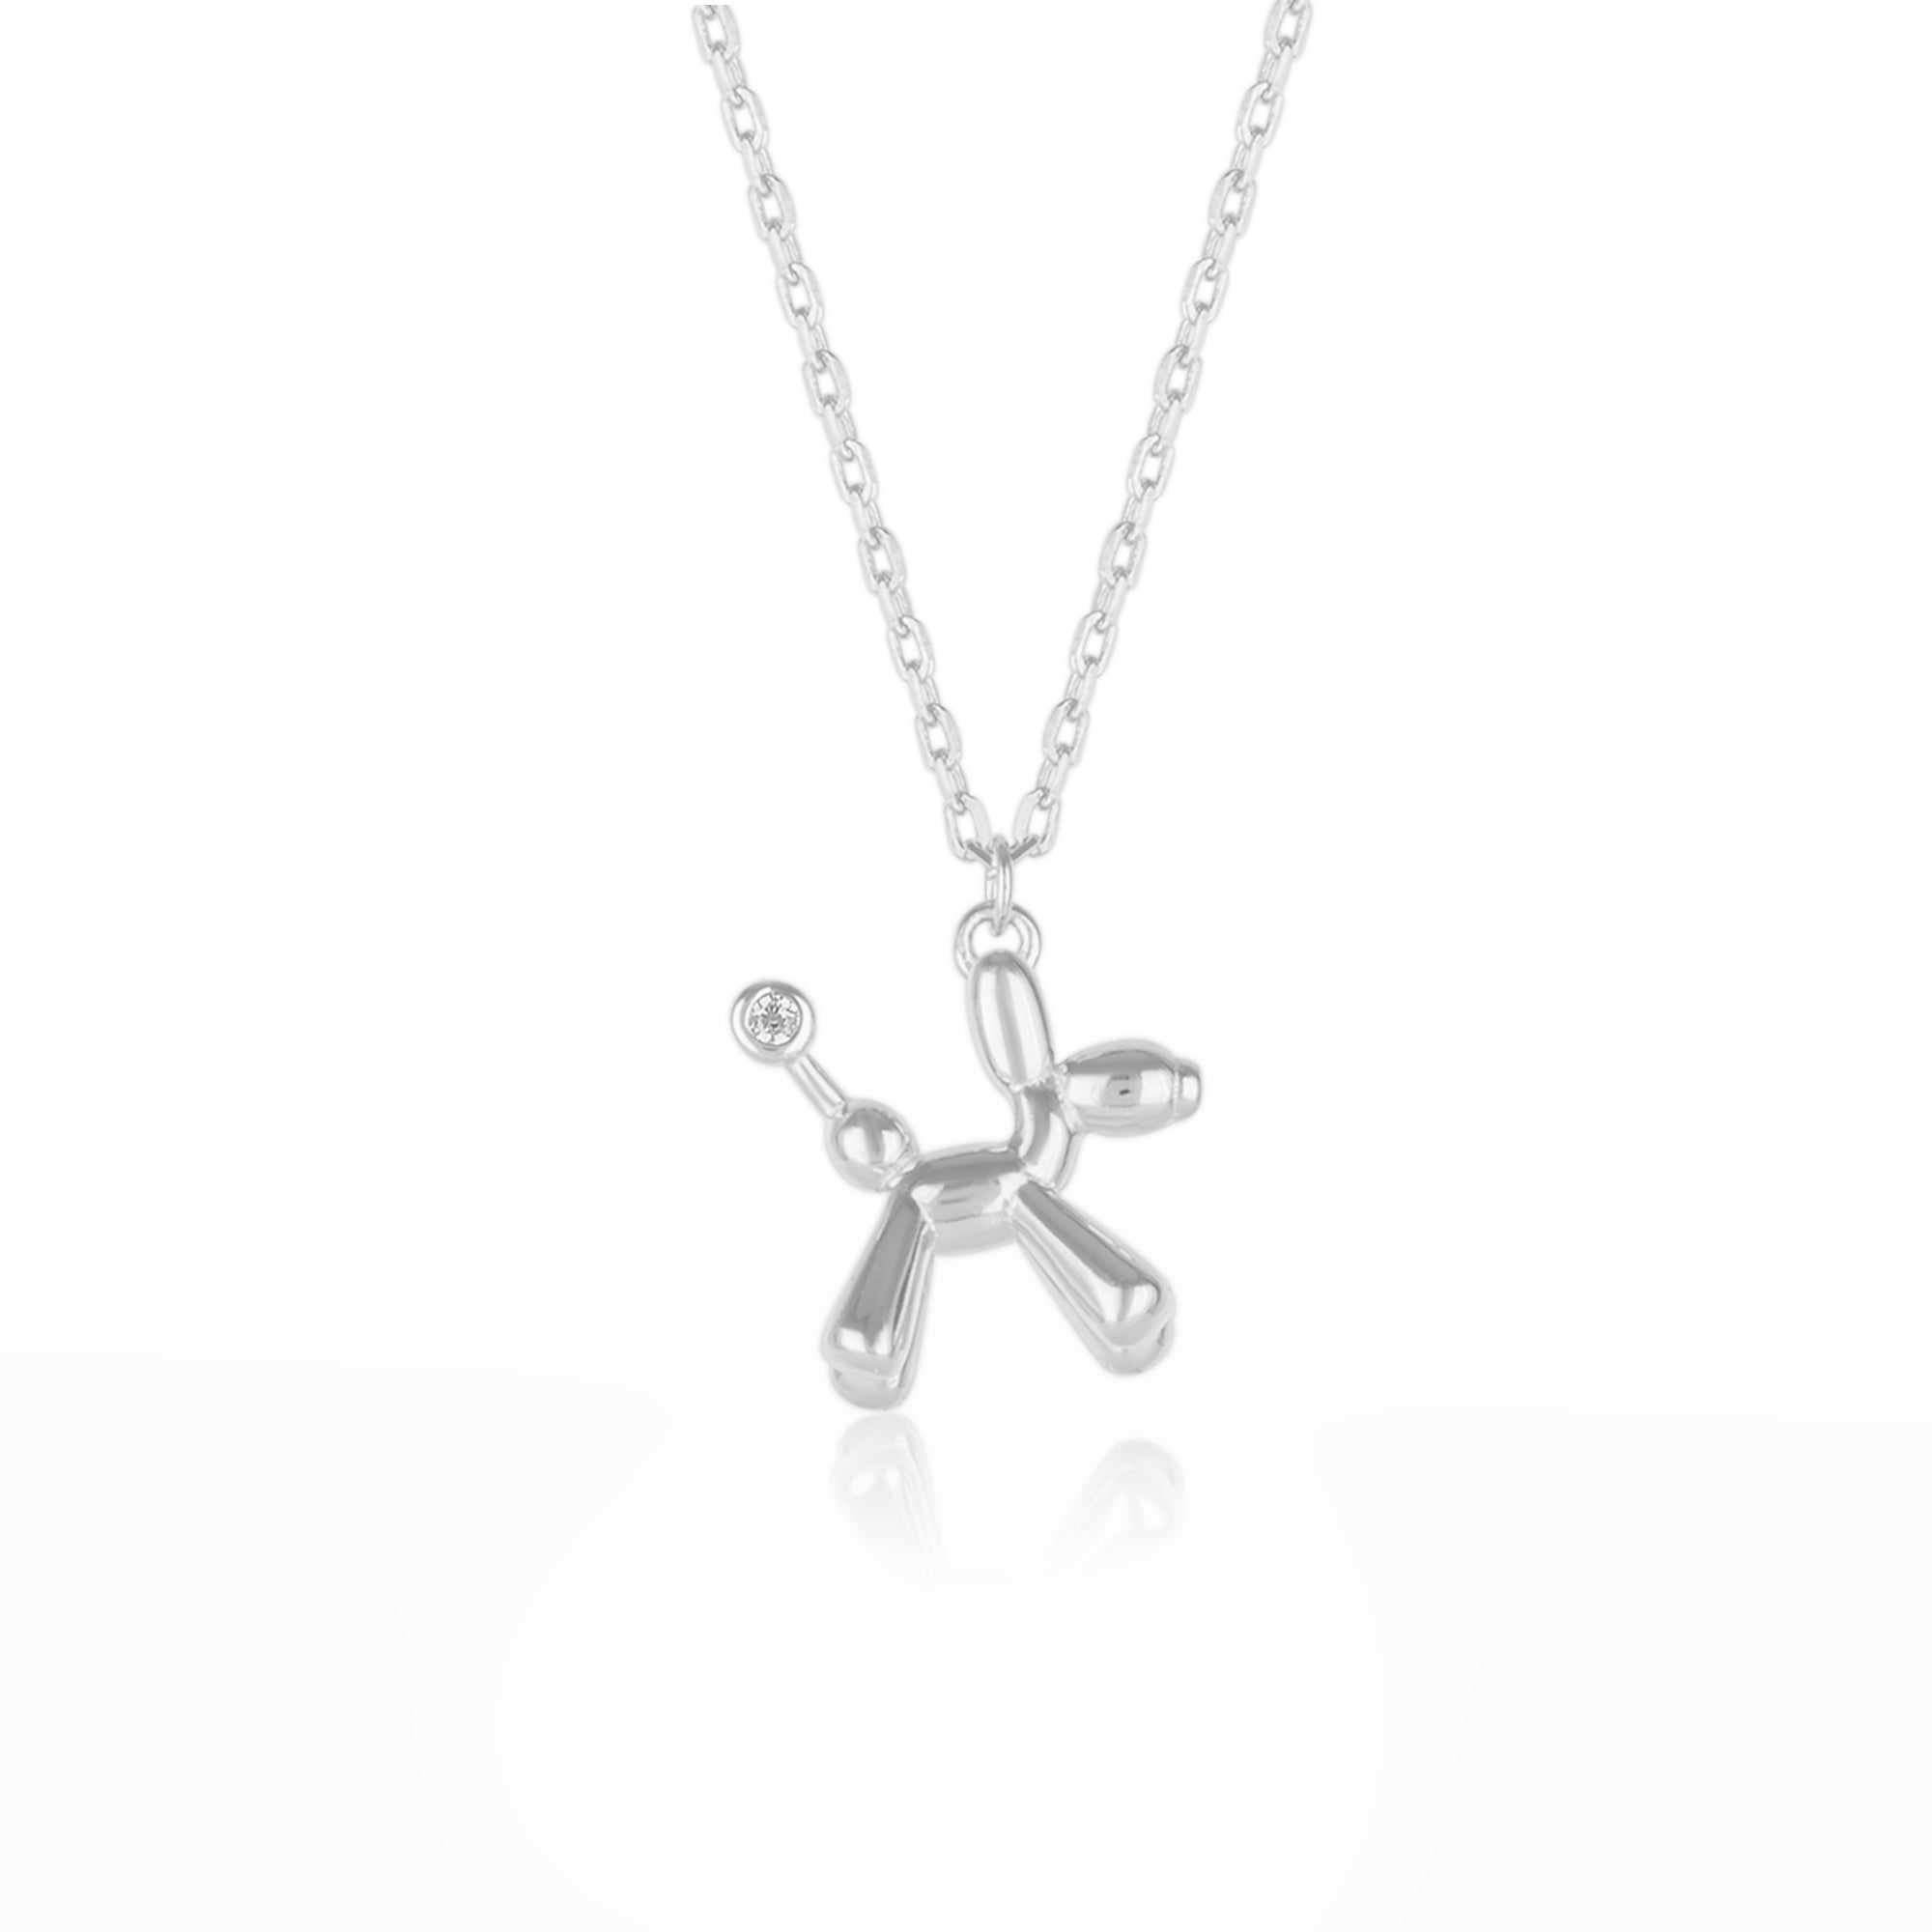 Tiny Balloon Dog Poodle Necklace in Sterling Silver